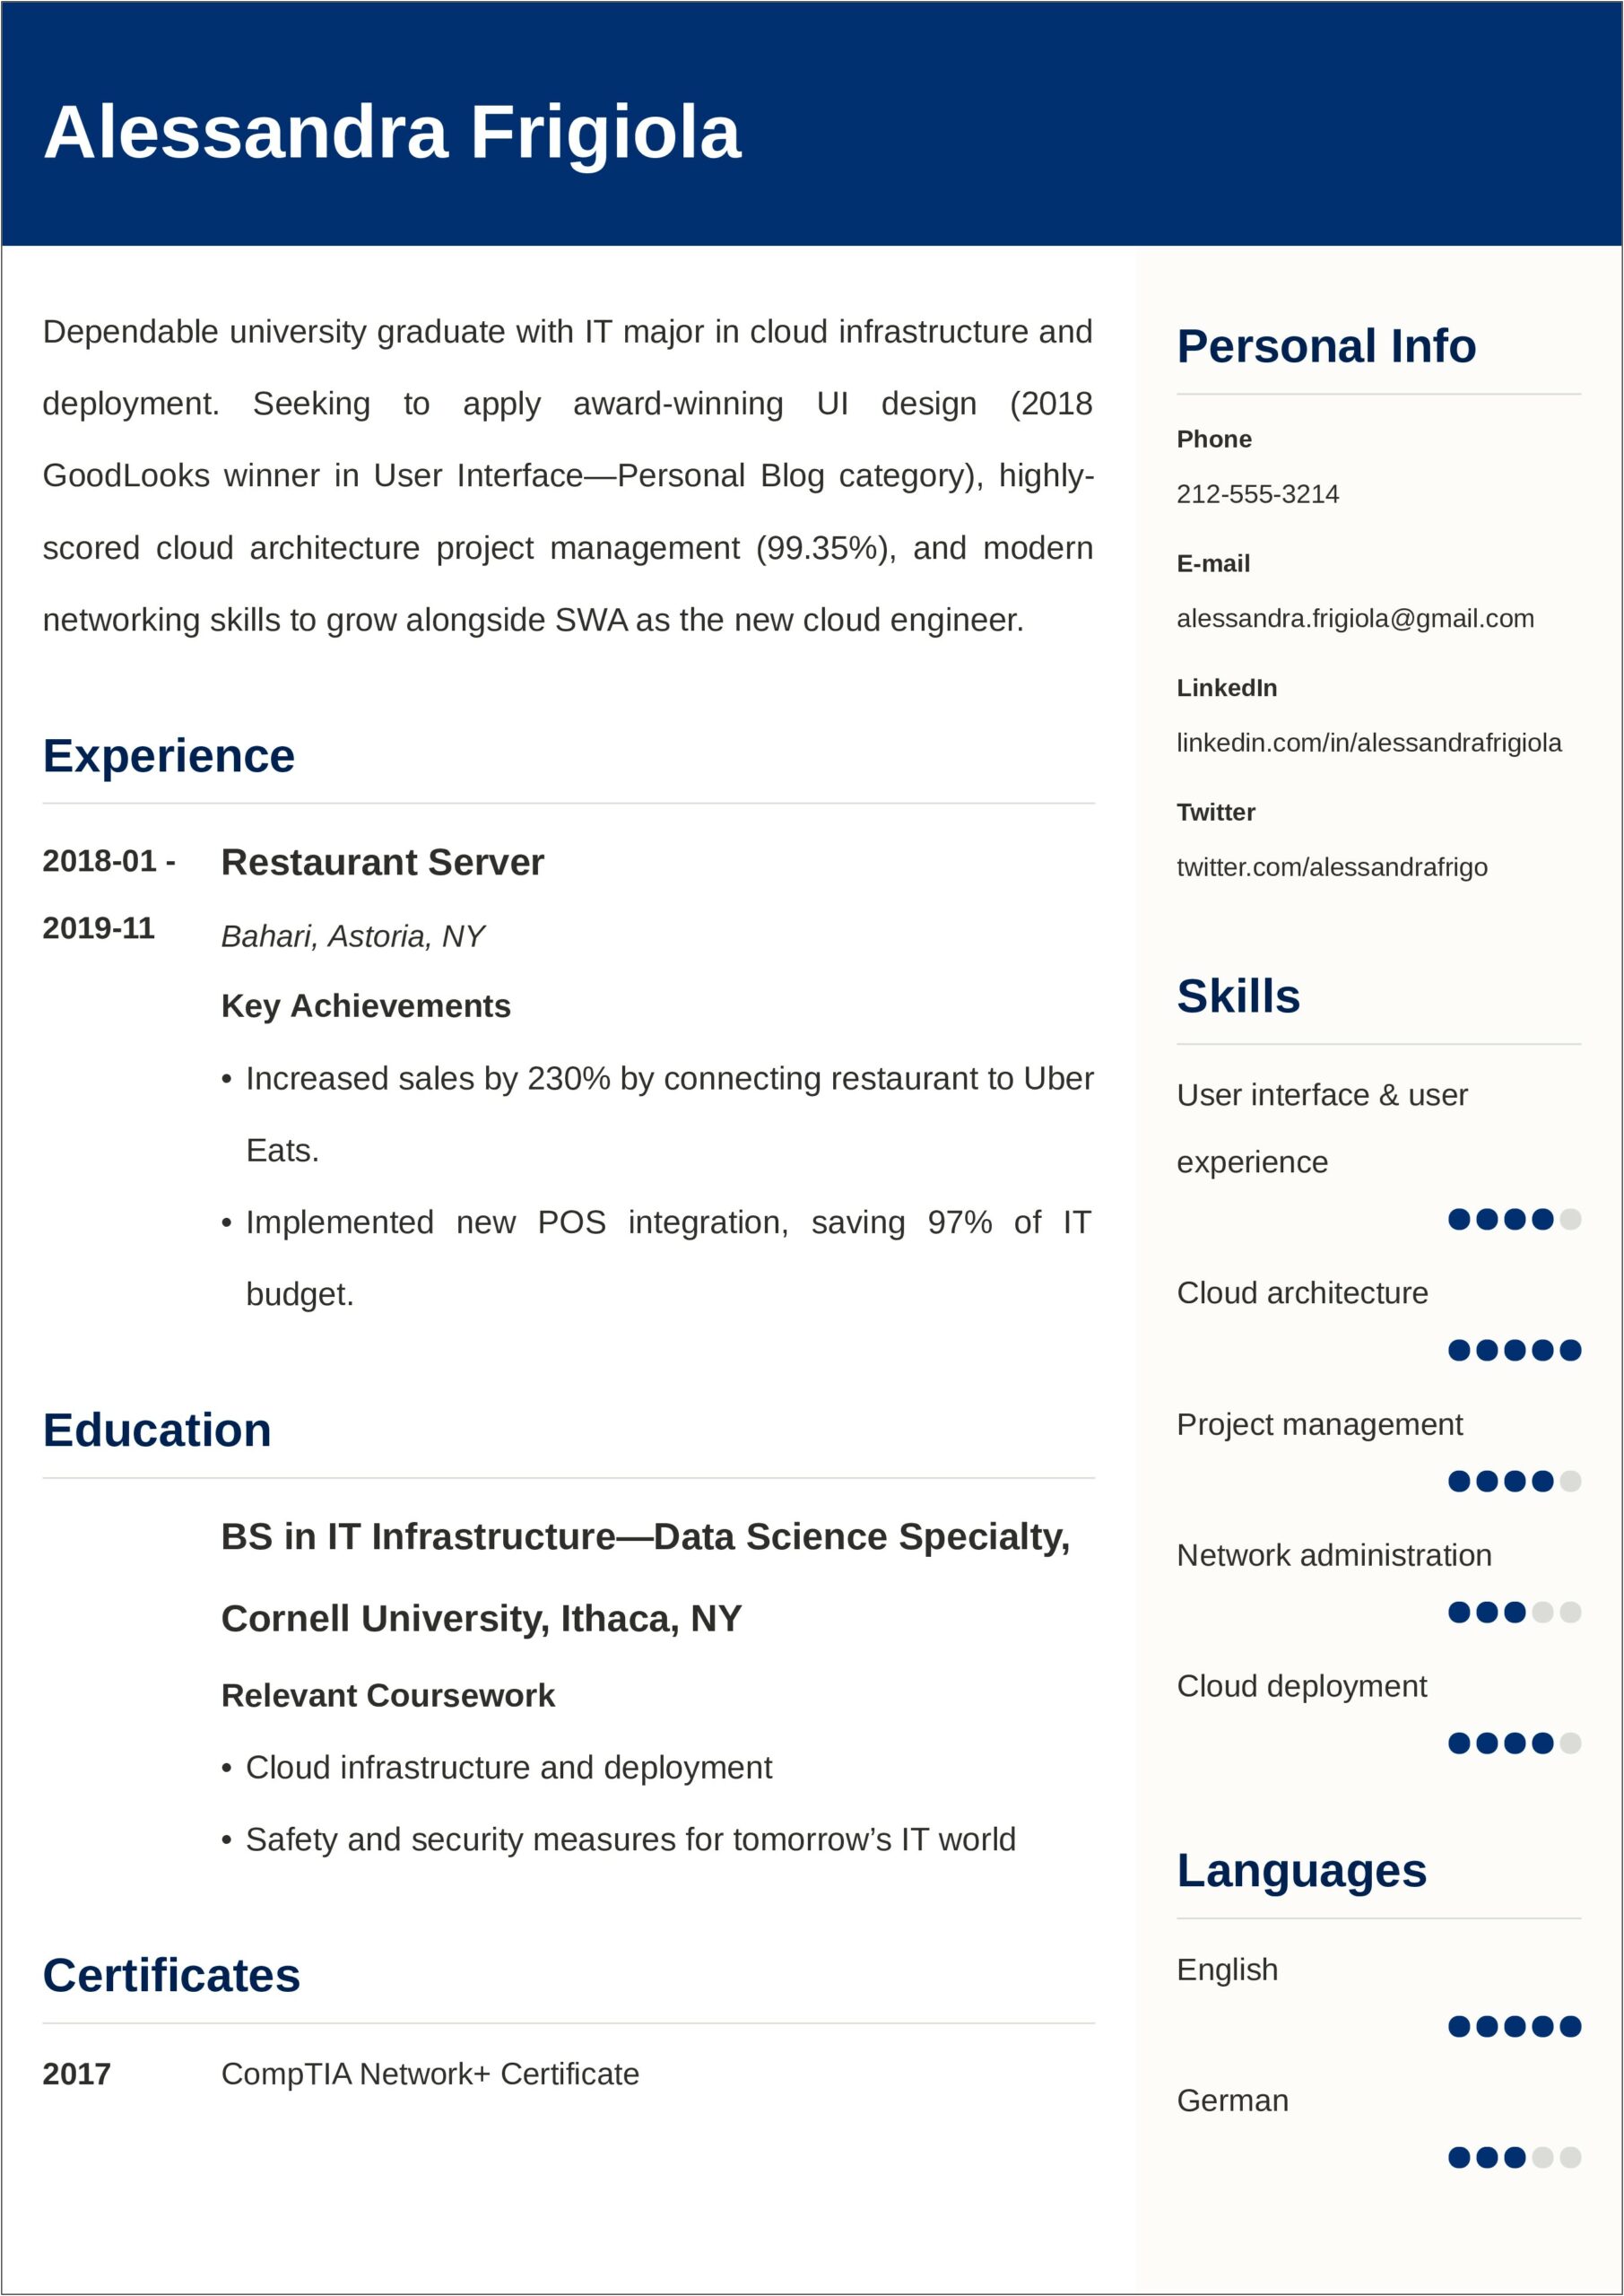 Resume For Someone With No Job History